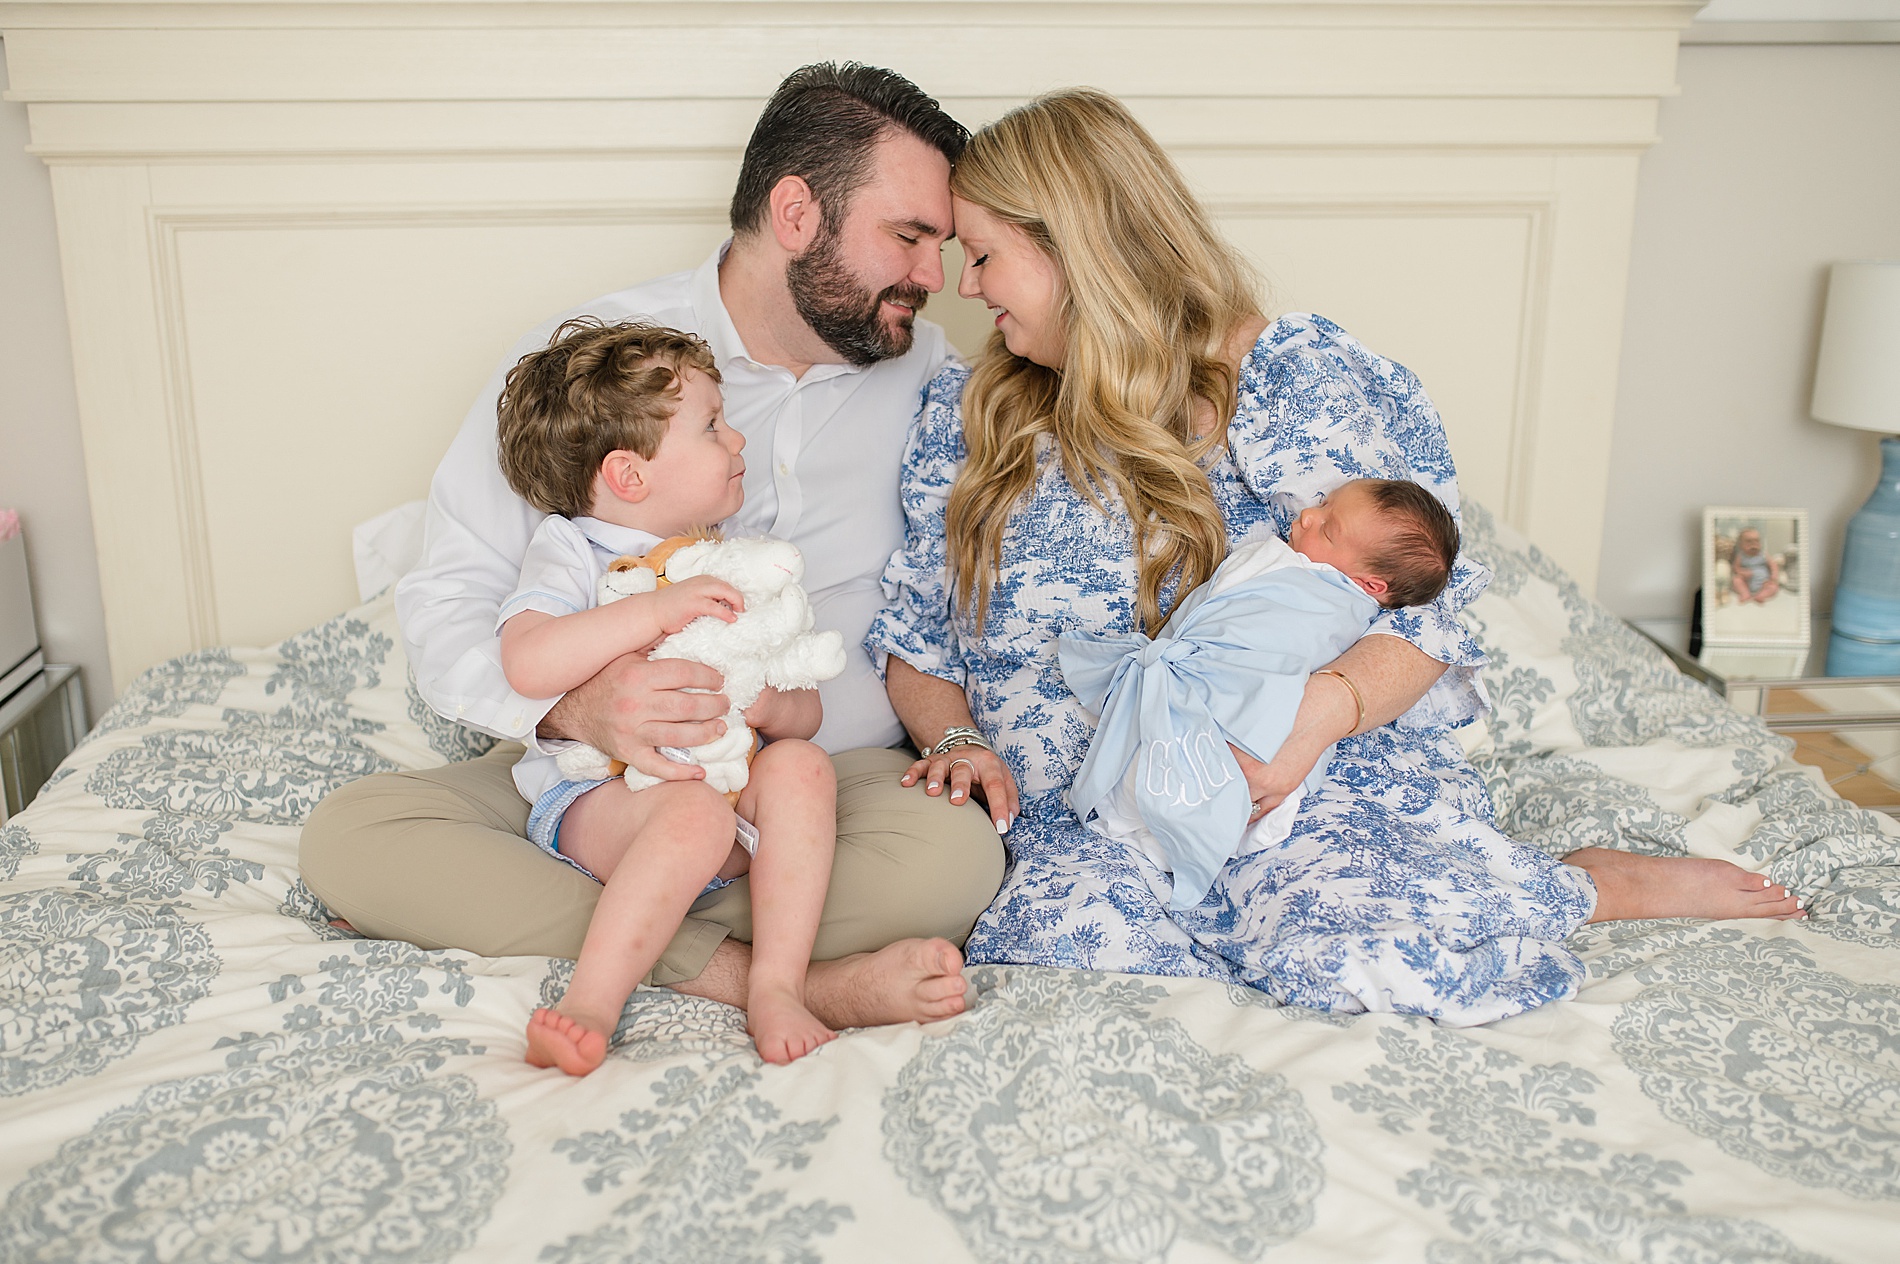 Family snuggling on bed photographed by Lindsey Dutton Photography, a Dallas Newborn photographer